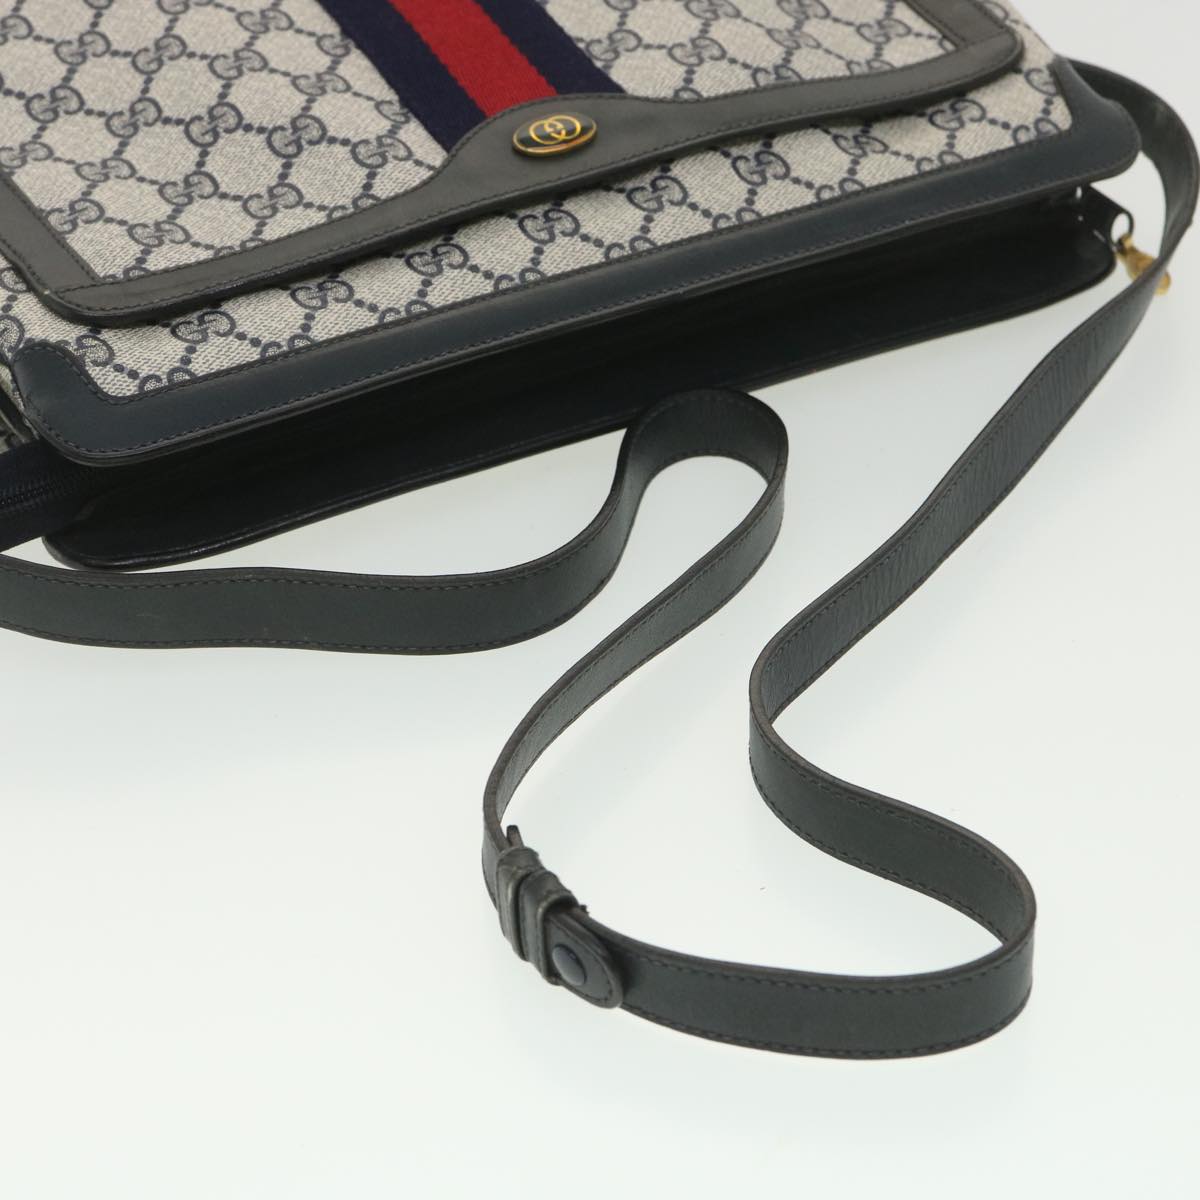 GUCCI GG Canvas Sherry Line Shoulder Bag PVC Leather Gray Red Navy Auth yk6173B